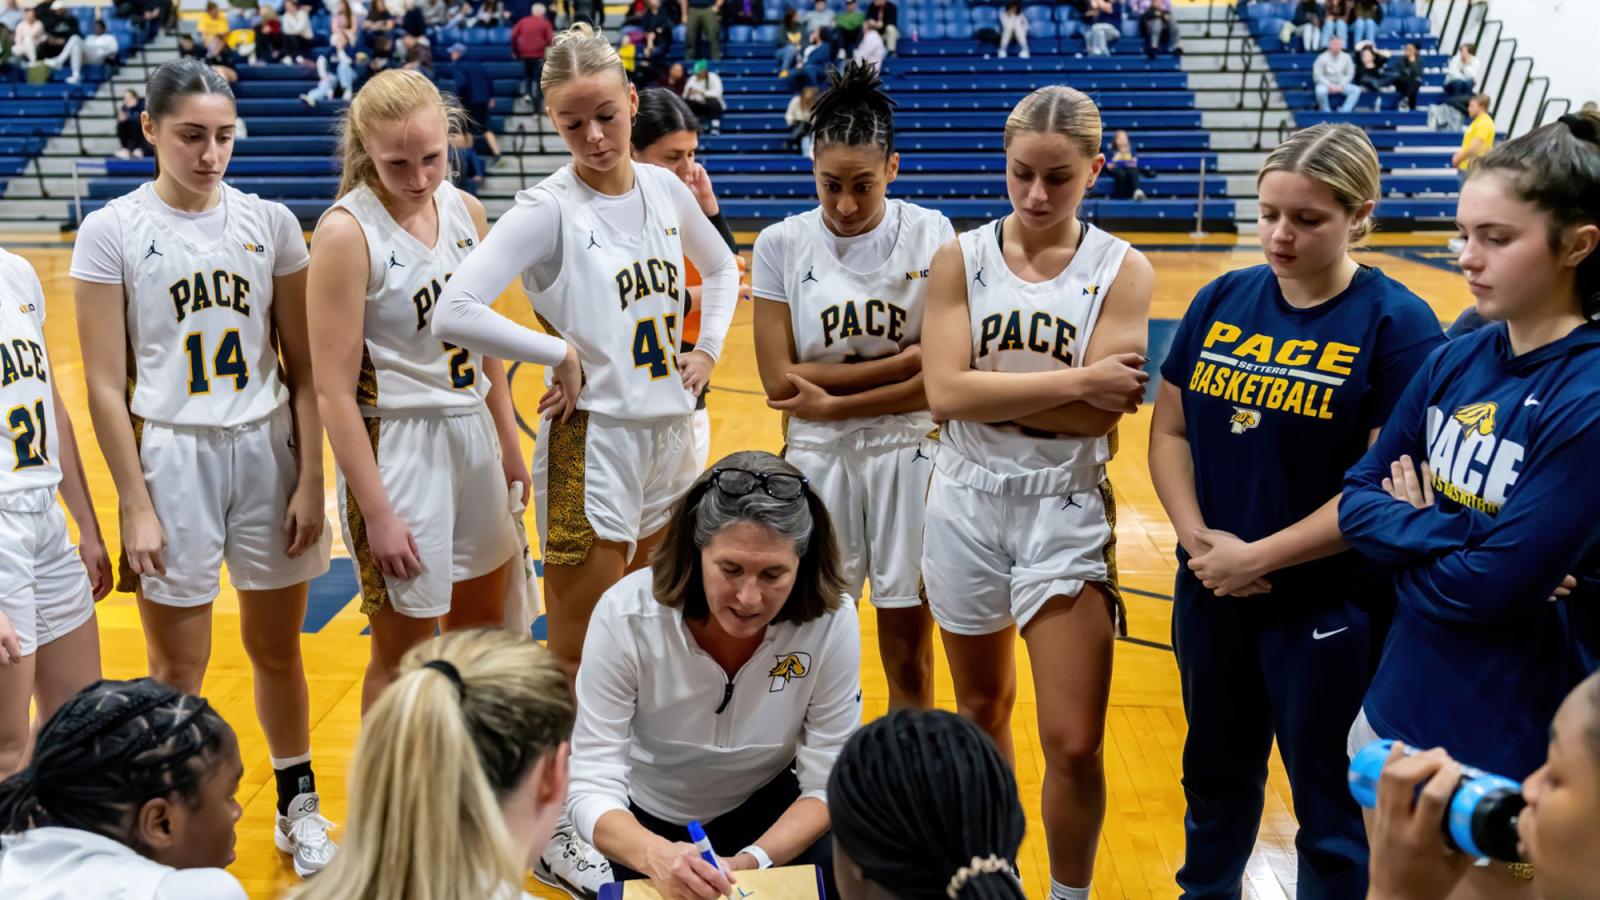 Pace women's basketball coach Carrie Seymour talking to team during timeout